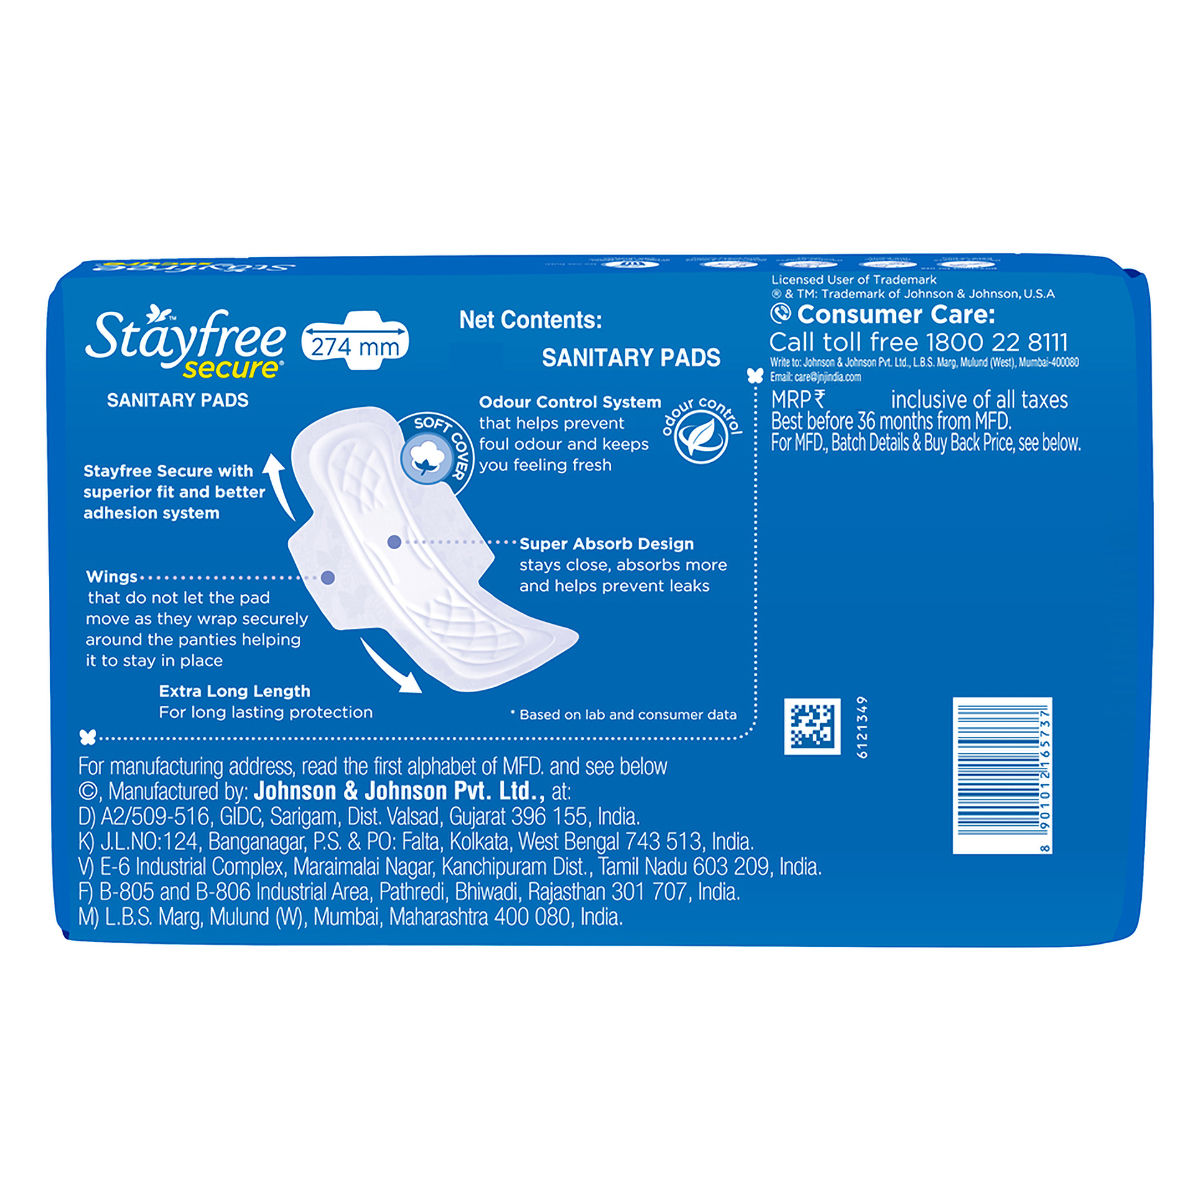 Stayfree Secure Cottony Soft Cover Pads With Wings XL, 40 Count, Pack of 1 